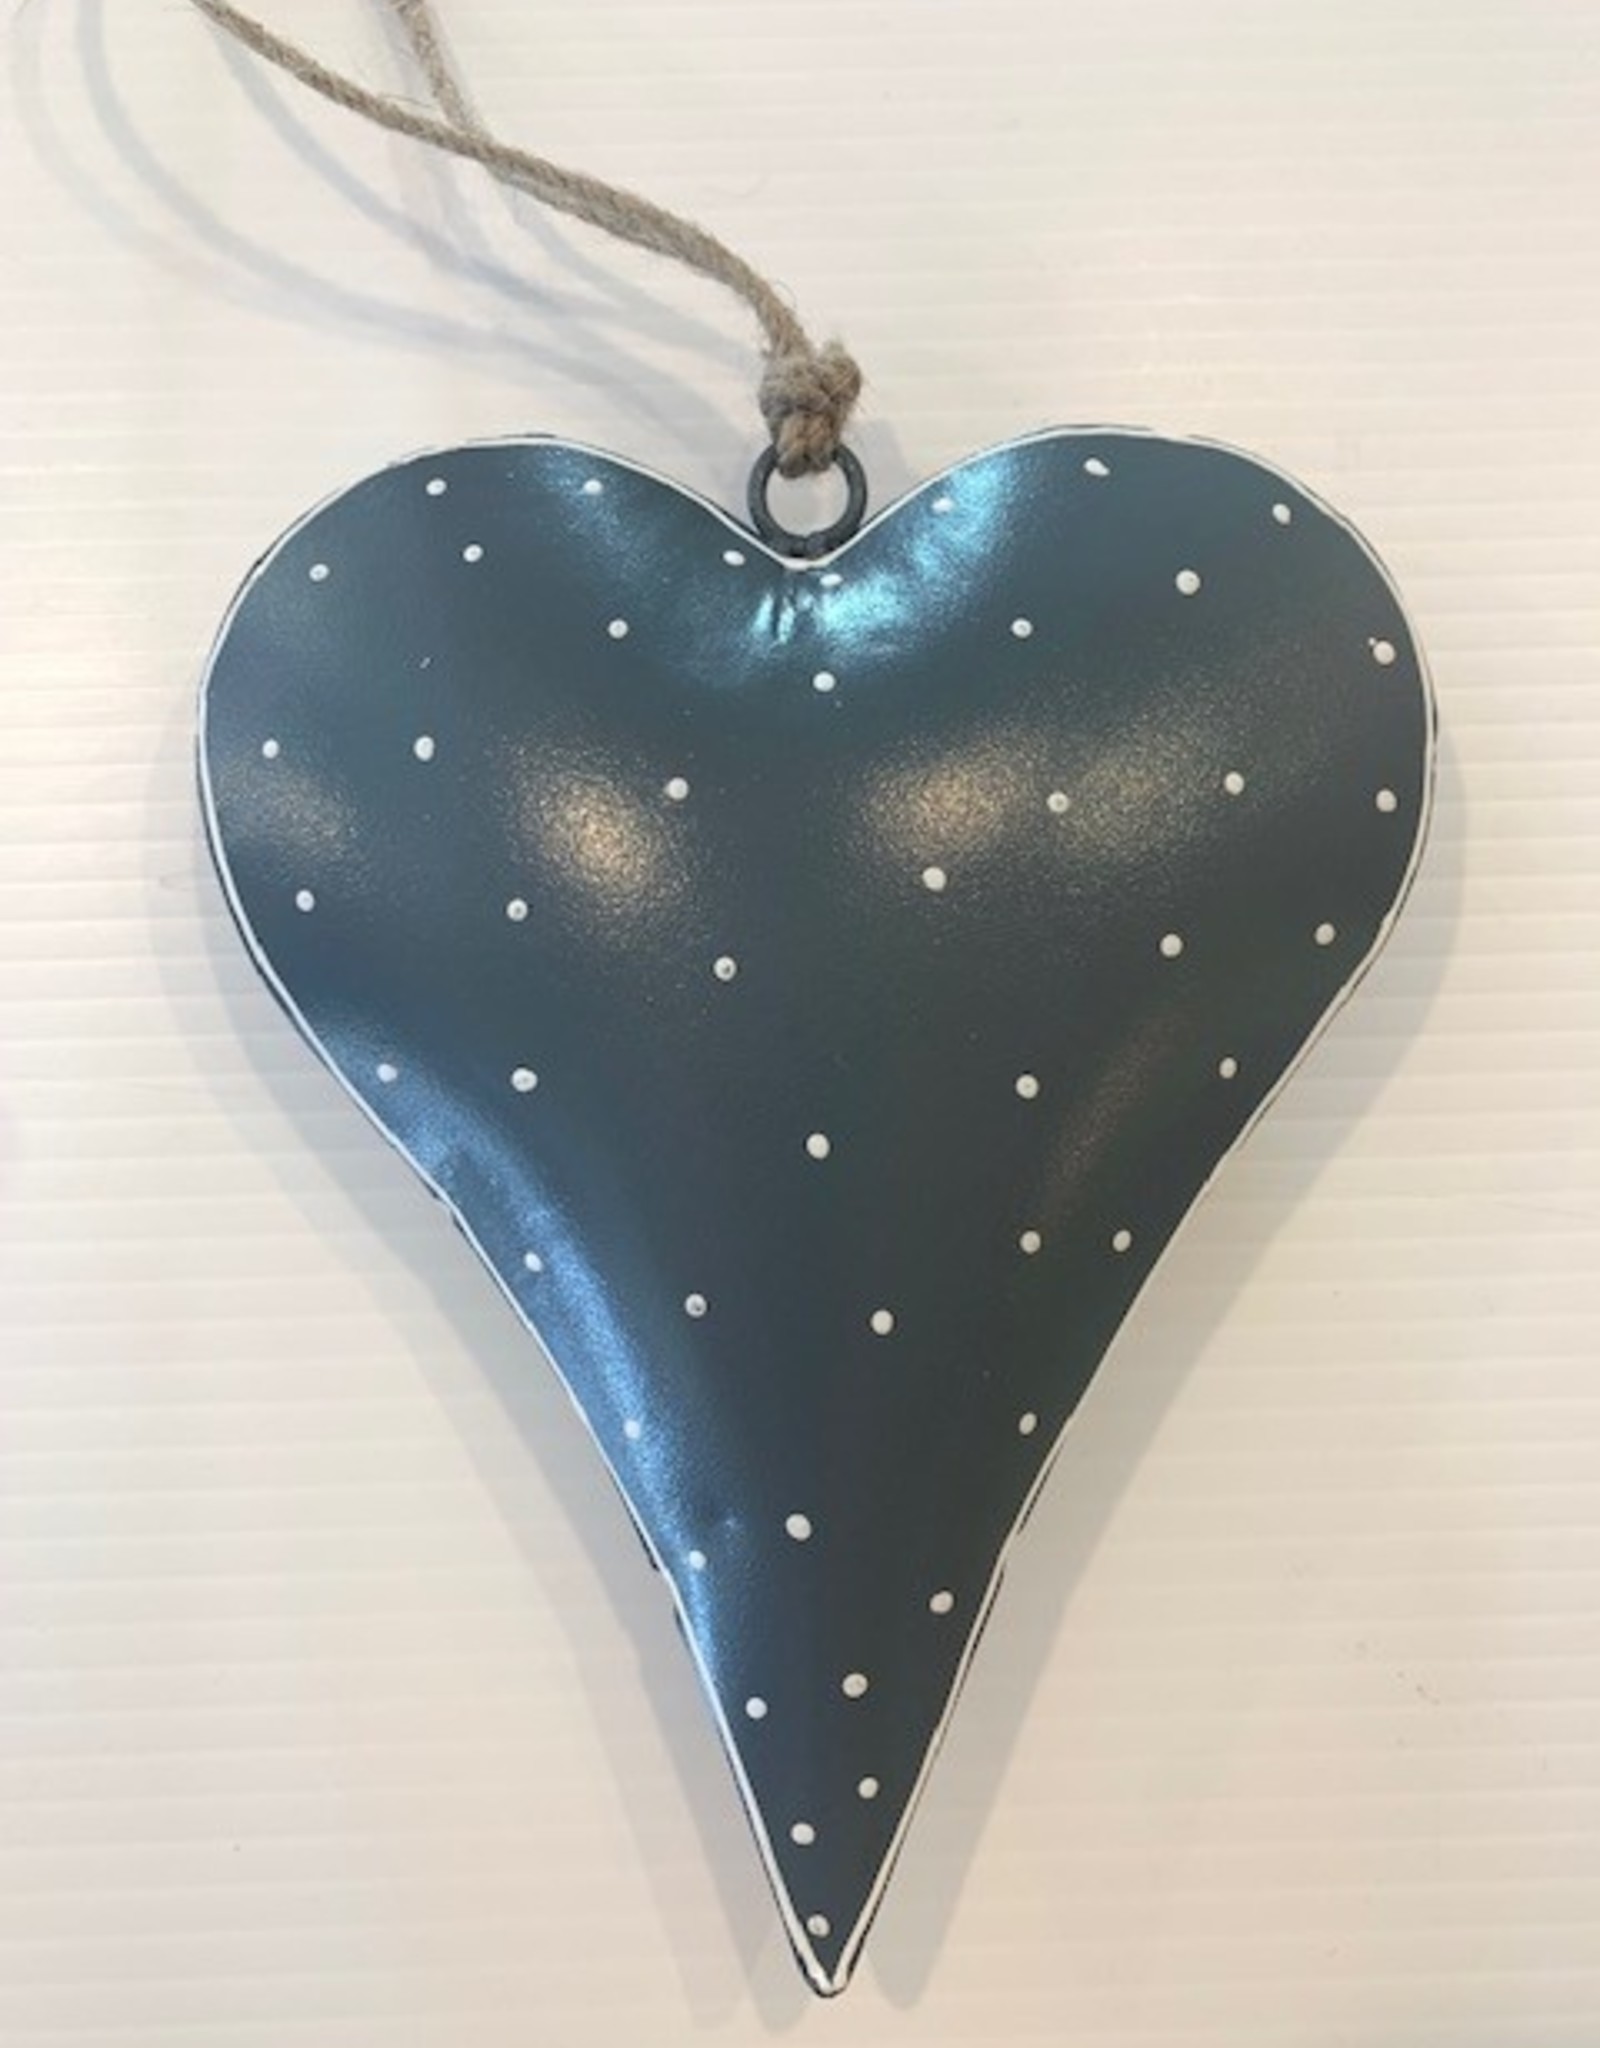 Jafsons Int. Painted Iron Heart - Charcoal w Wht dots 8"